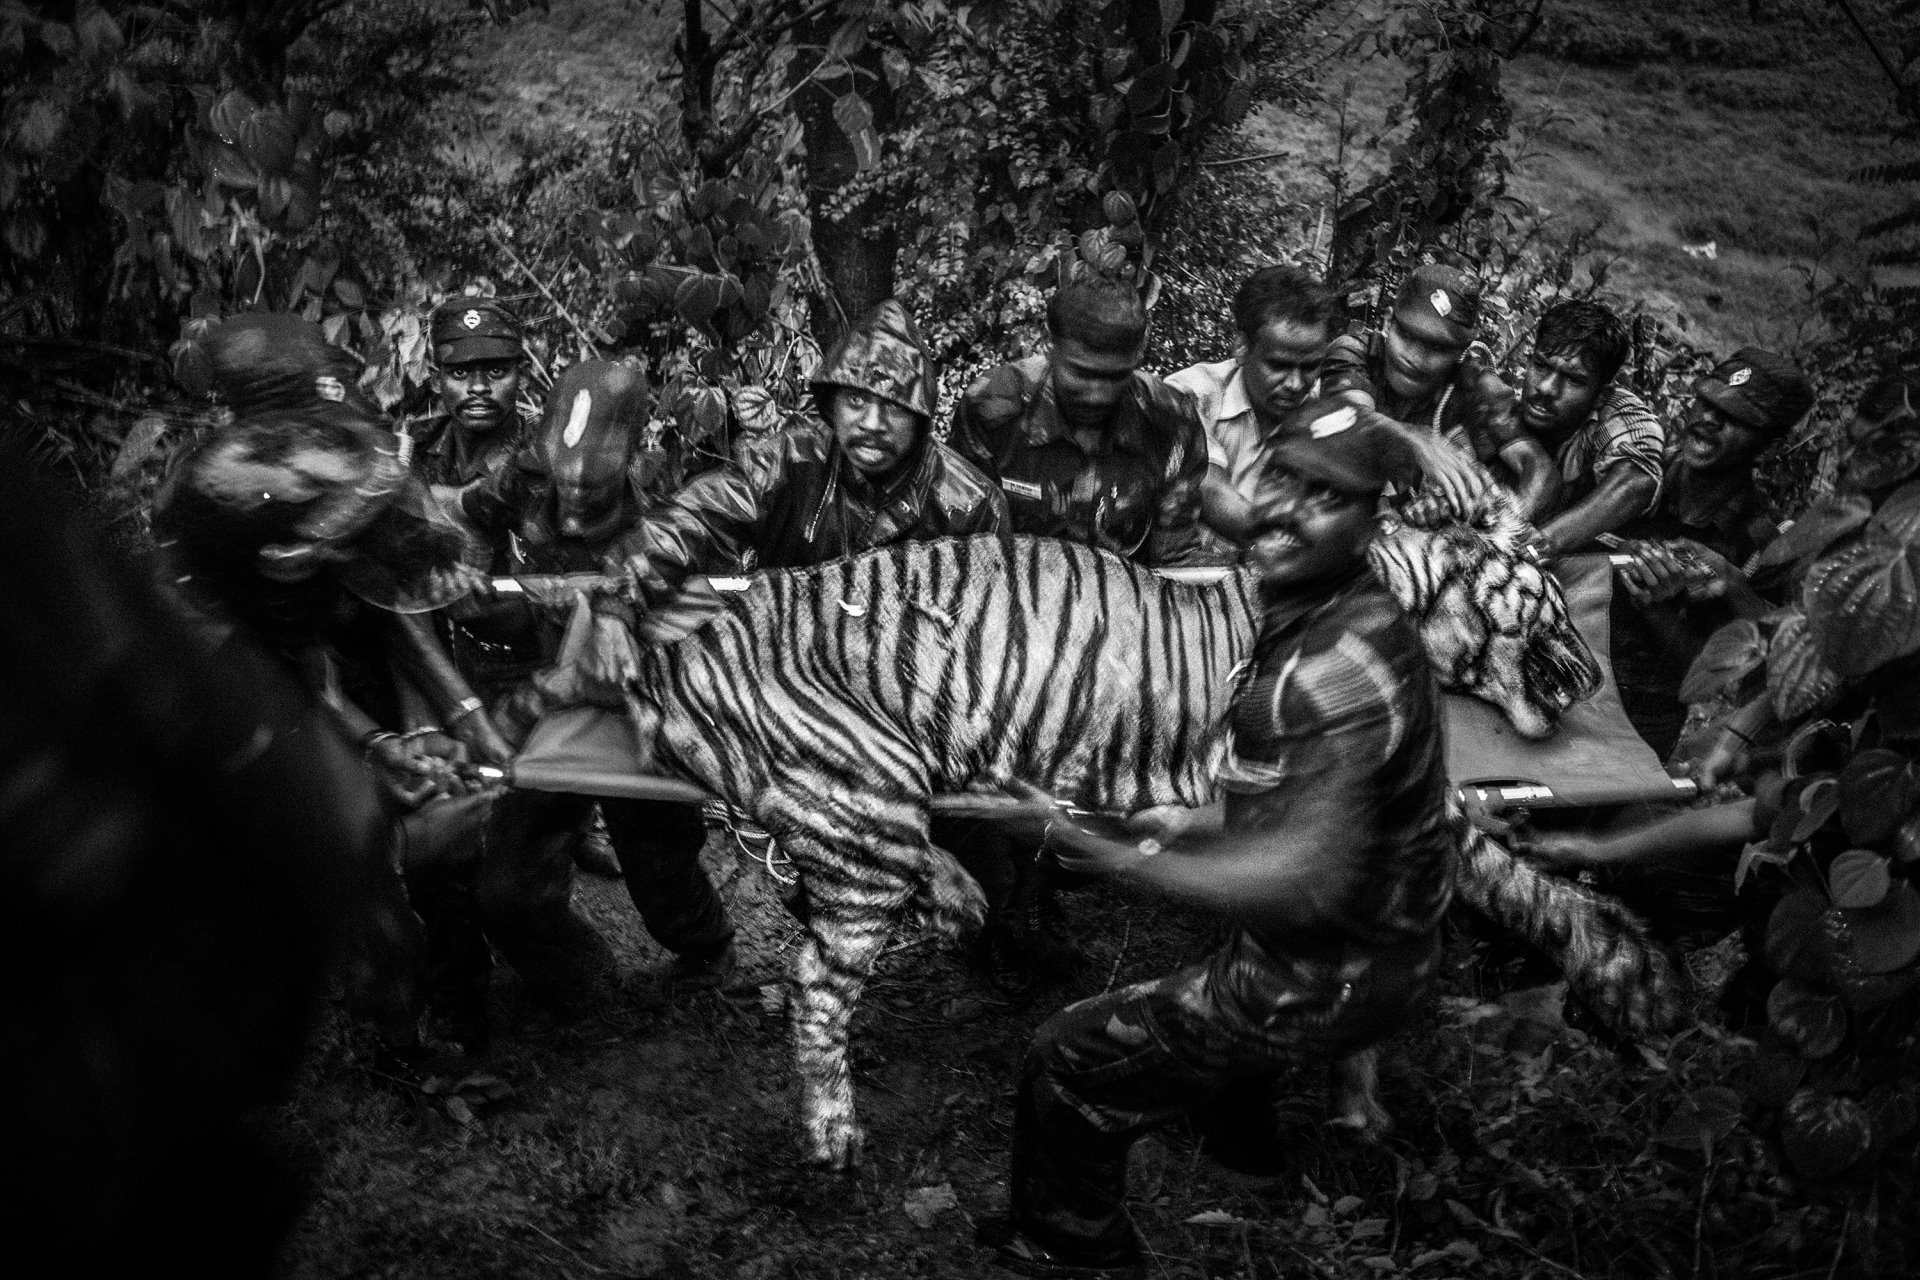 <p>A ten-year-old male tiger lies tranquilized as it is shifted to a cage to be removed, after entering a village and killing cattle, close to the town of Valparai, near the Anamalai Tiger Reserve, Tamil Nadu, India. Valparai, where large parts of forest have been cleared to make way for tea plantations, is a high human-animal conflict zone.</p>
